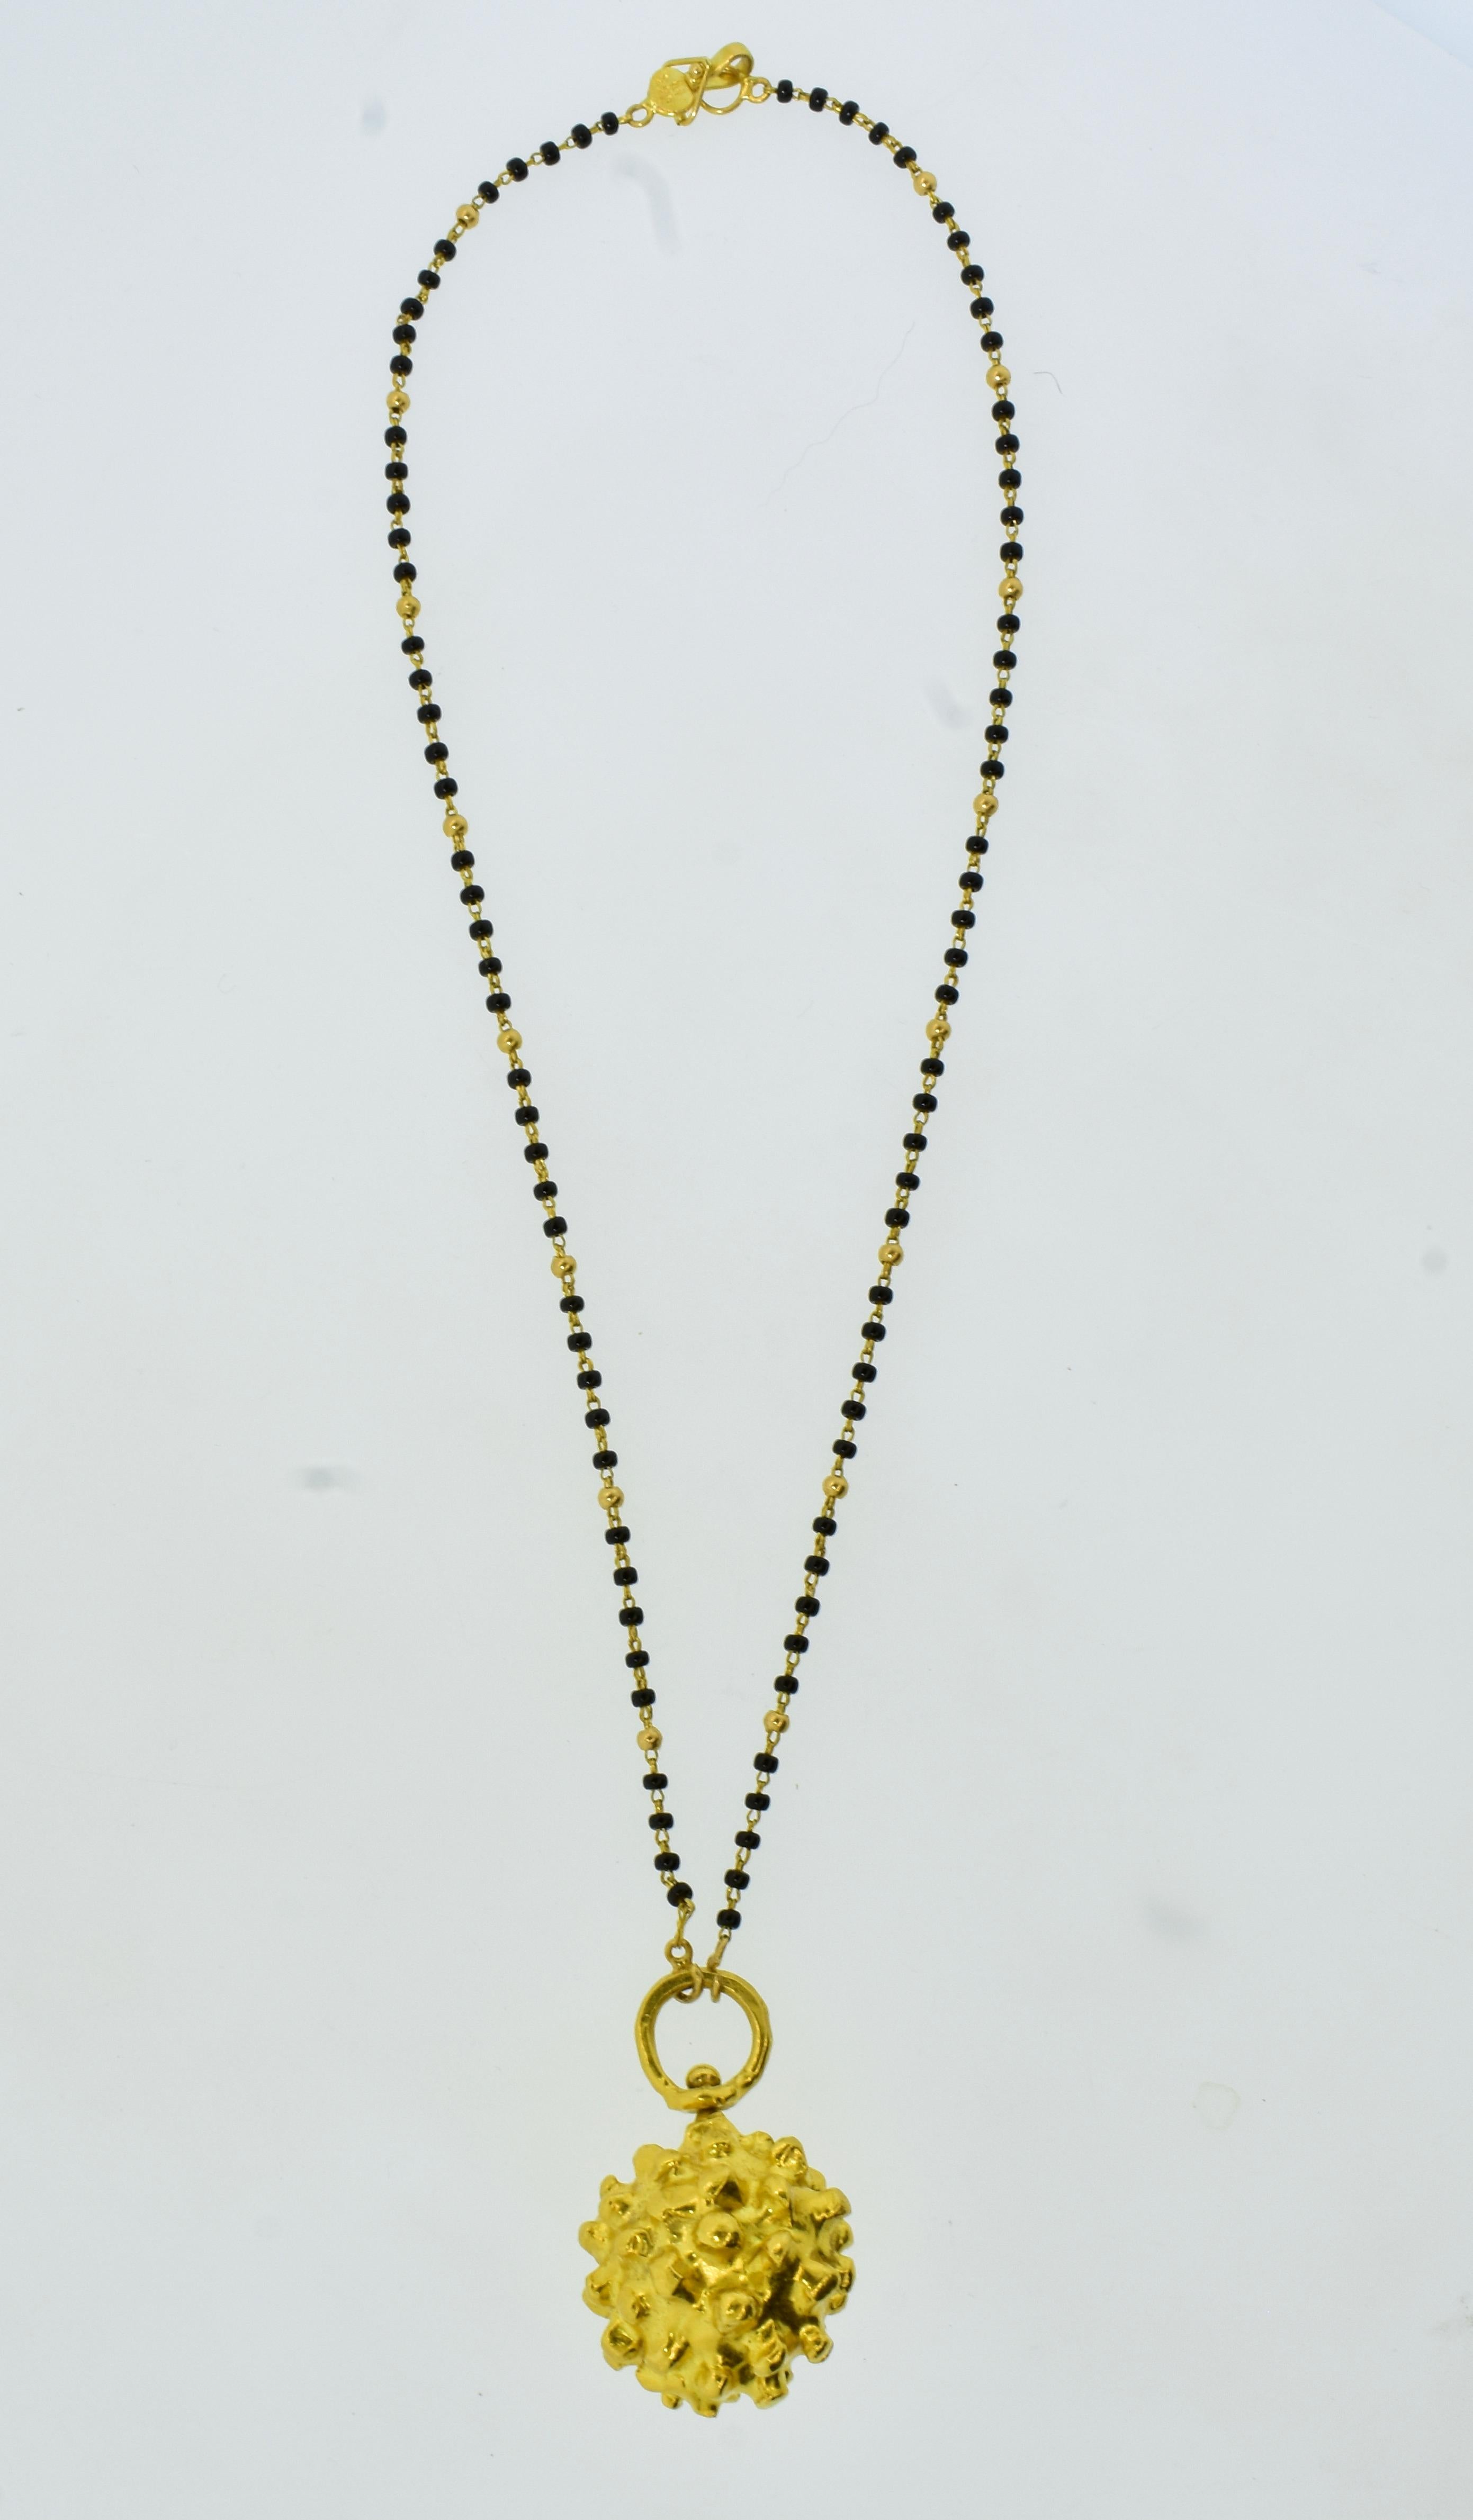 Jean Mahie Etruscan ball pendant is very easy to wear and distinctive.  Shown here on a contemporary gold chain with onyx small balls which has a length of 16.5 inches.  This piece is a classic piece from the world famous House of Jean Mahie.  The